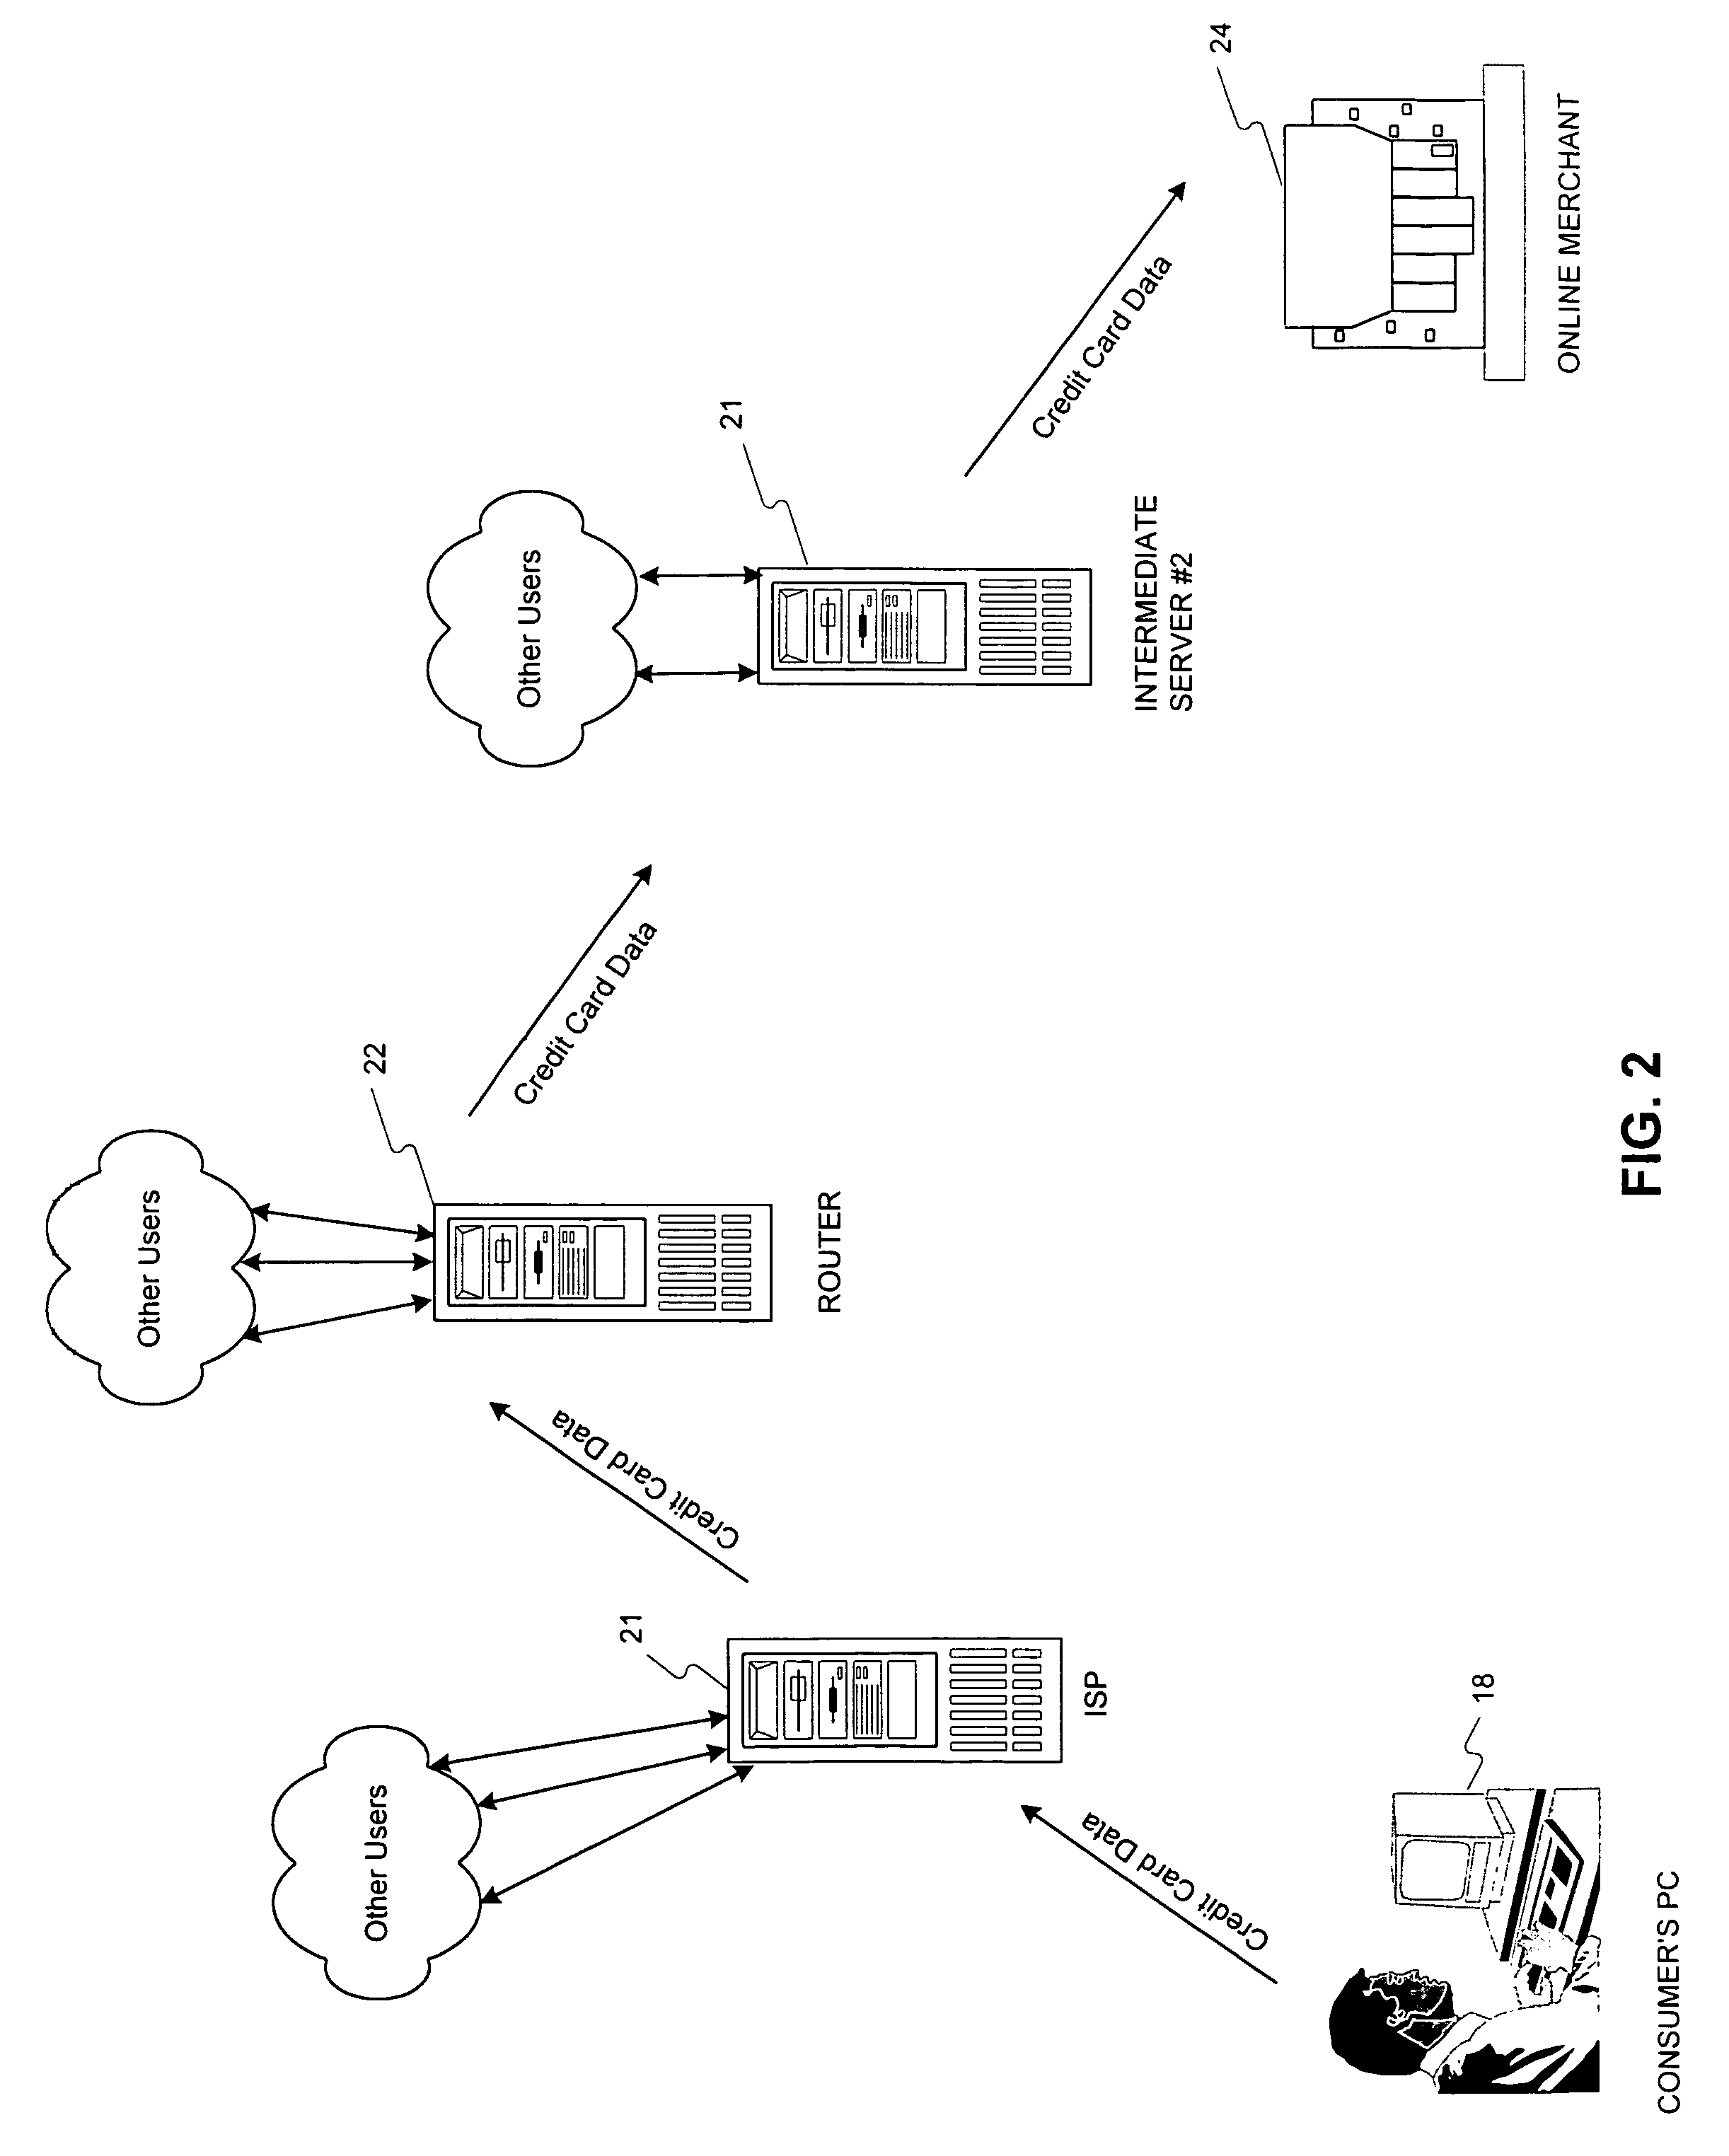 System and method for processing financial transactions